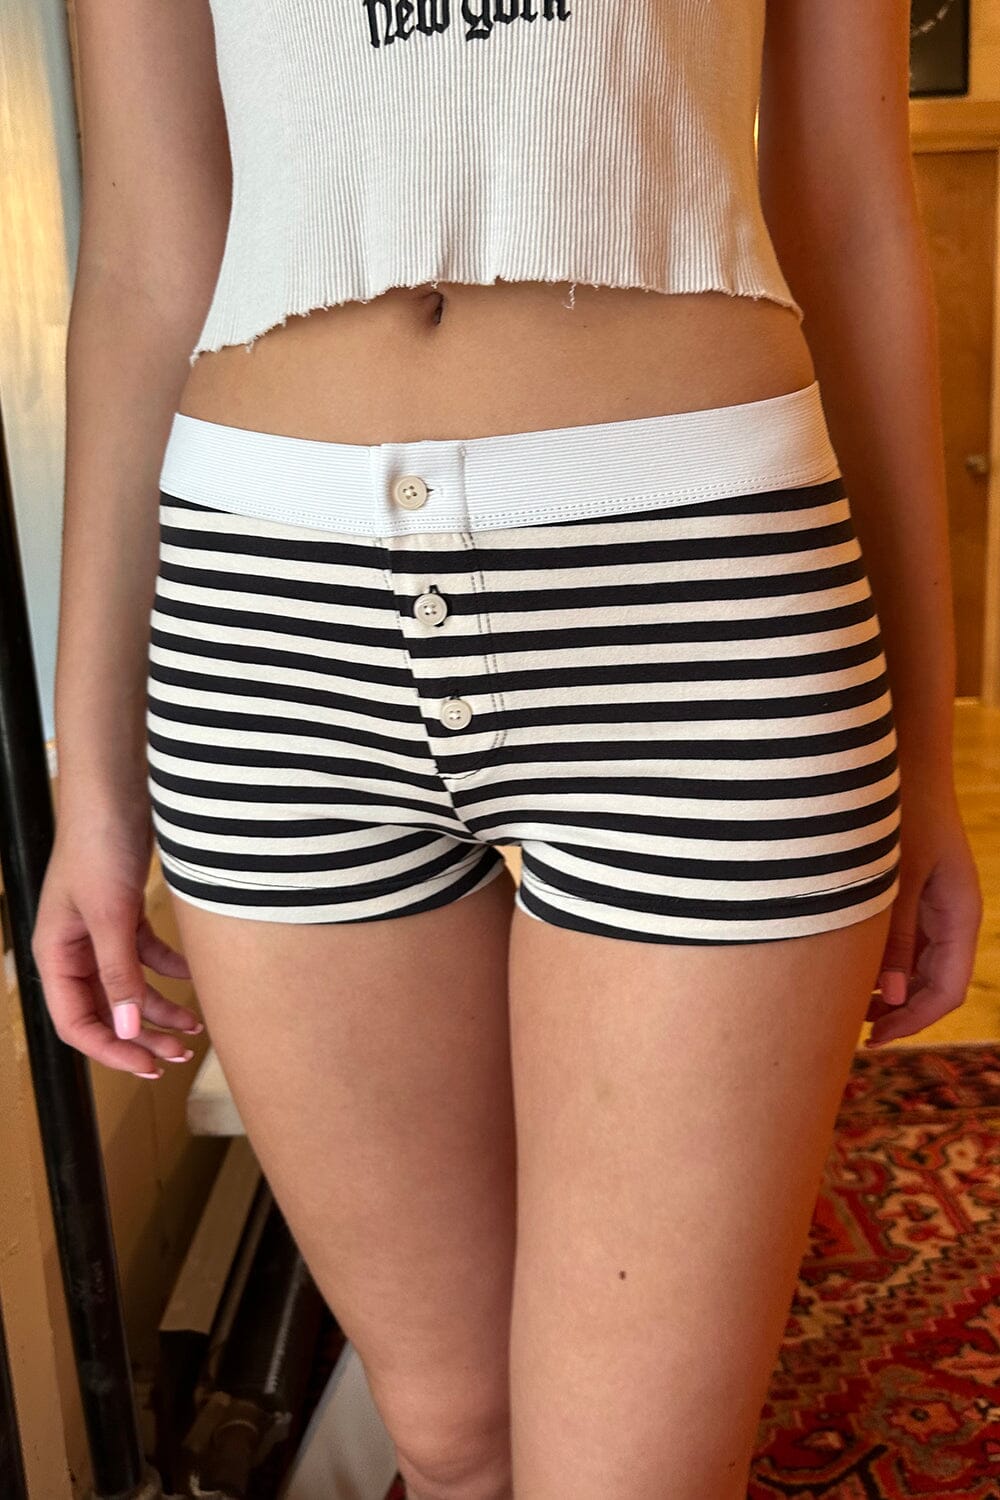 Brandy Melville Shorts - $20 (42% Off Retail) - From Brianna